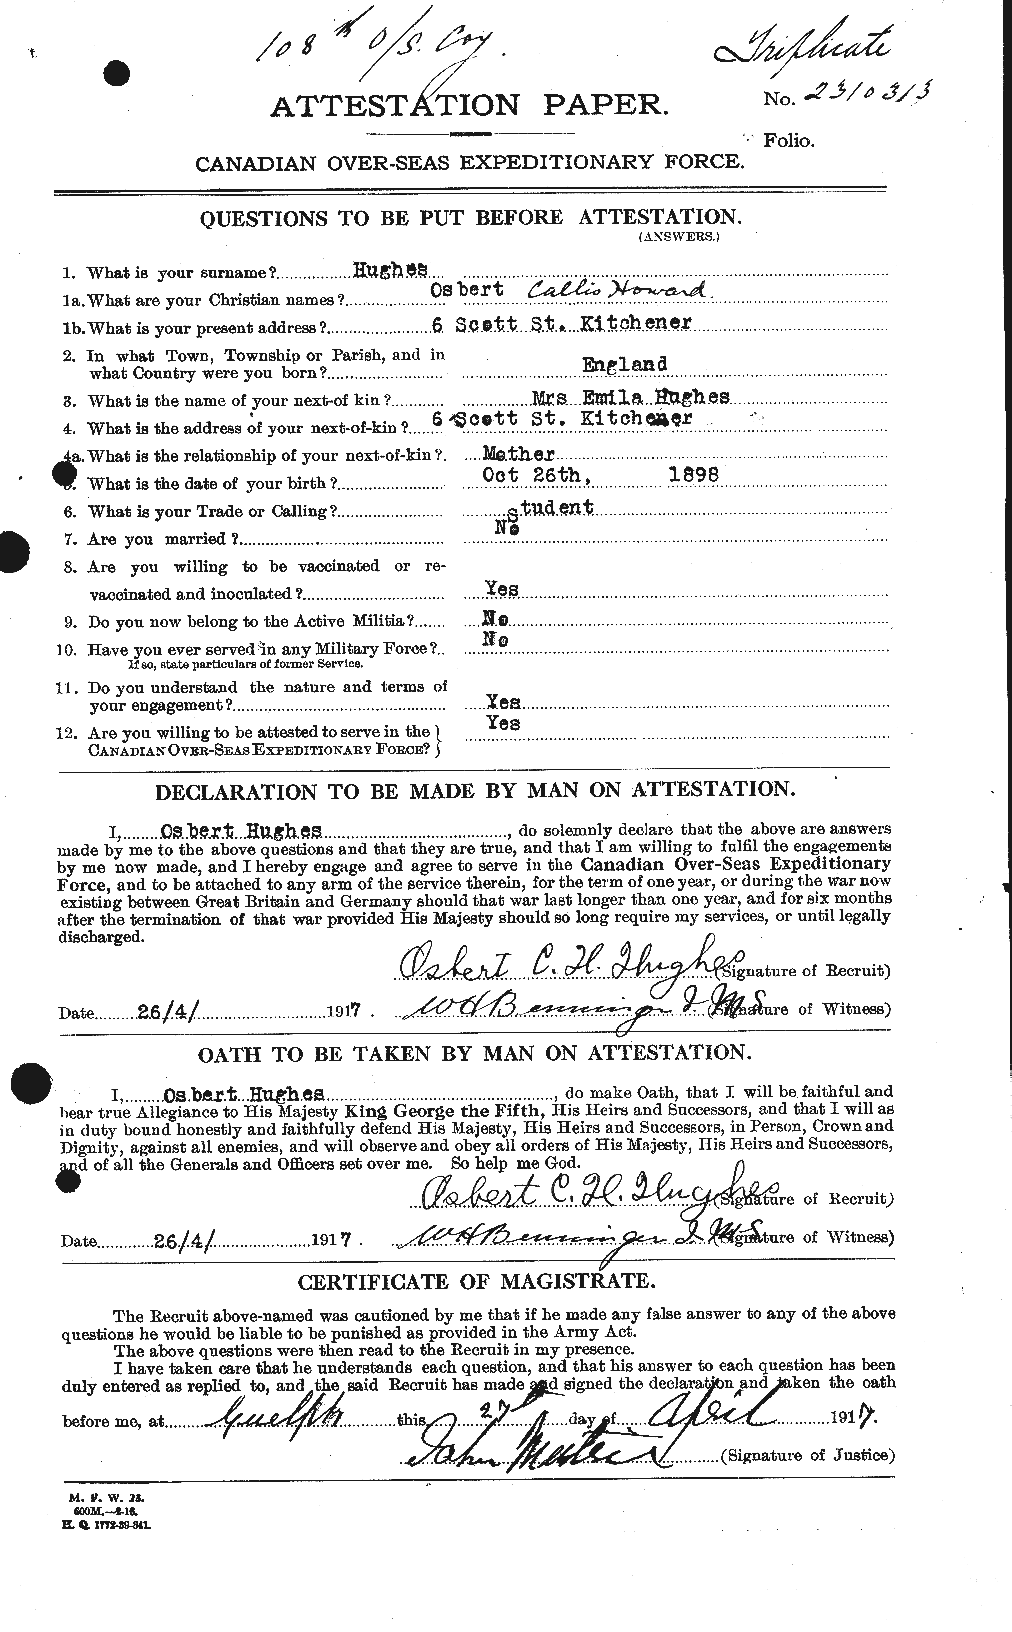 Personnel Records of the First World War - CEF 404136a